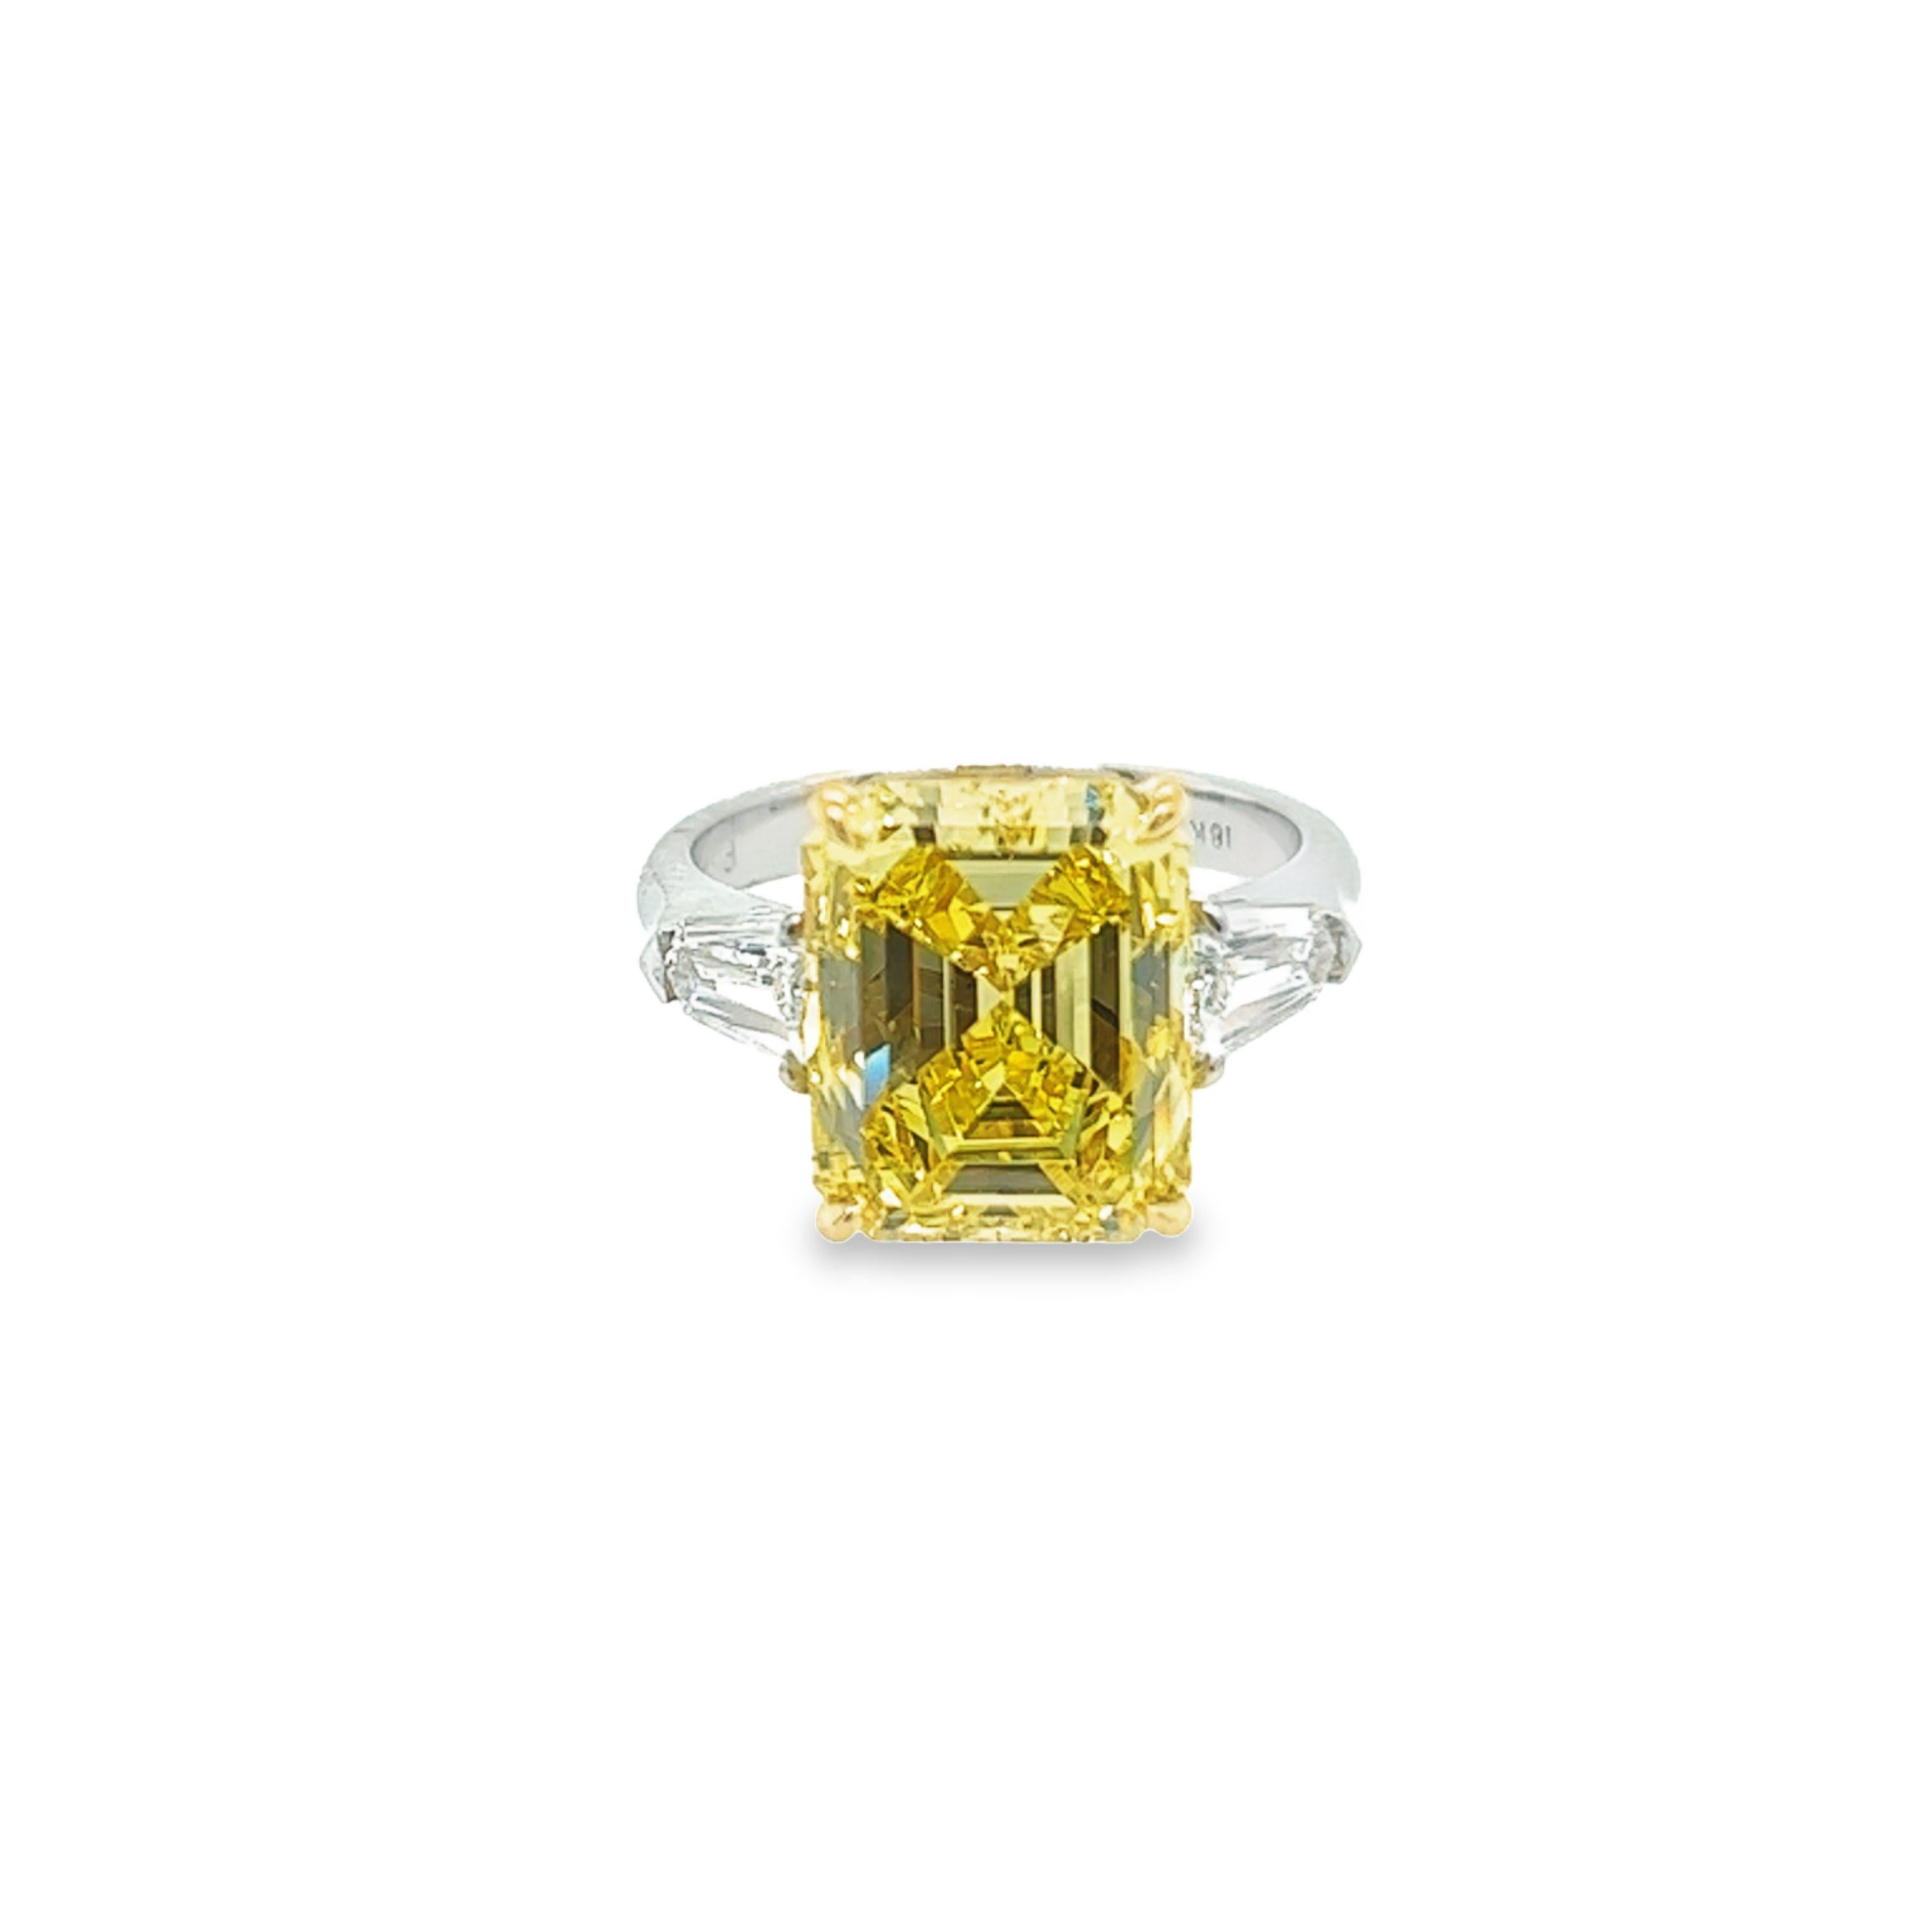 Rosenberg Diamonds & Co. 6.40 carat Emerald cut Fancy Vivd Yellow VS1 clarity is accompanied by a GIA certificate. This incredible bright Emerald is full of life and it is set in a handmade platinum and 18 karat yellow gold setting with perfectly